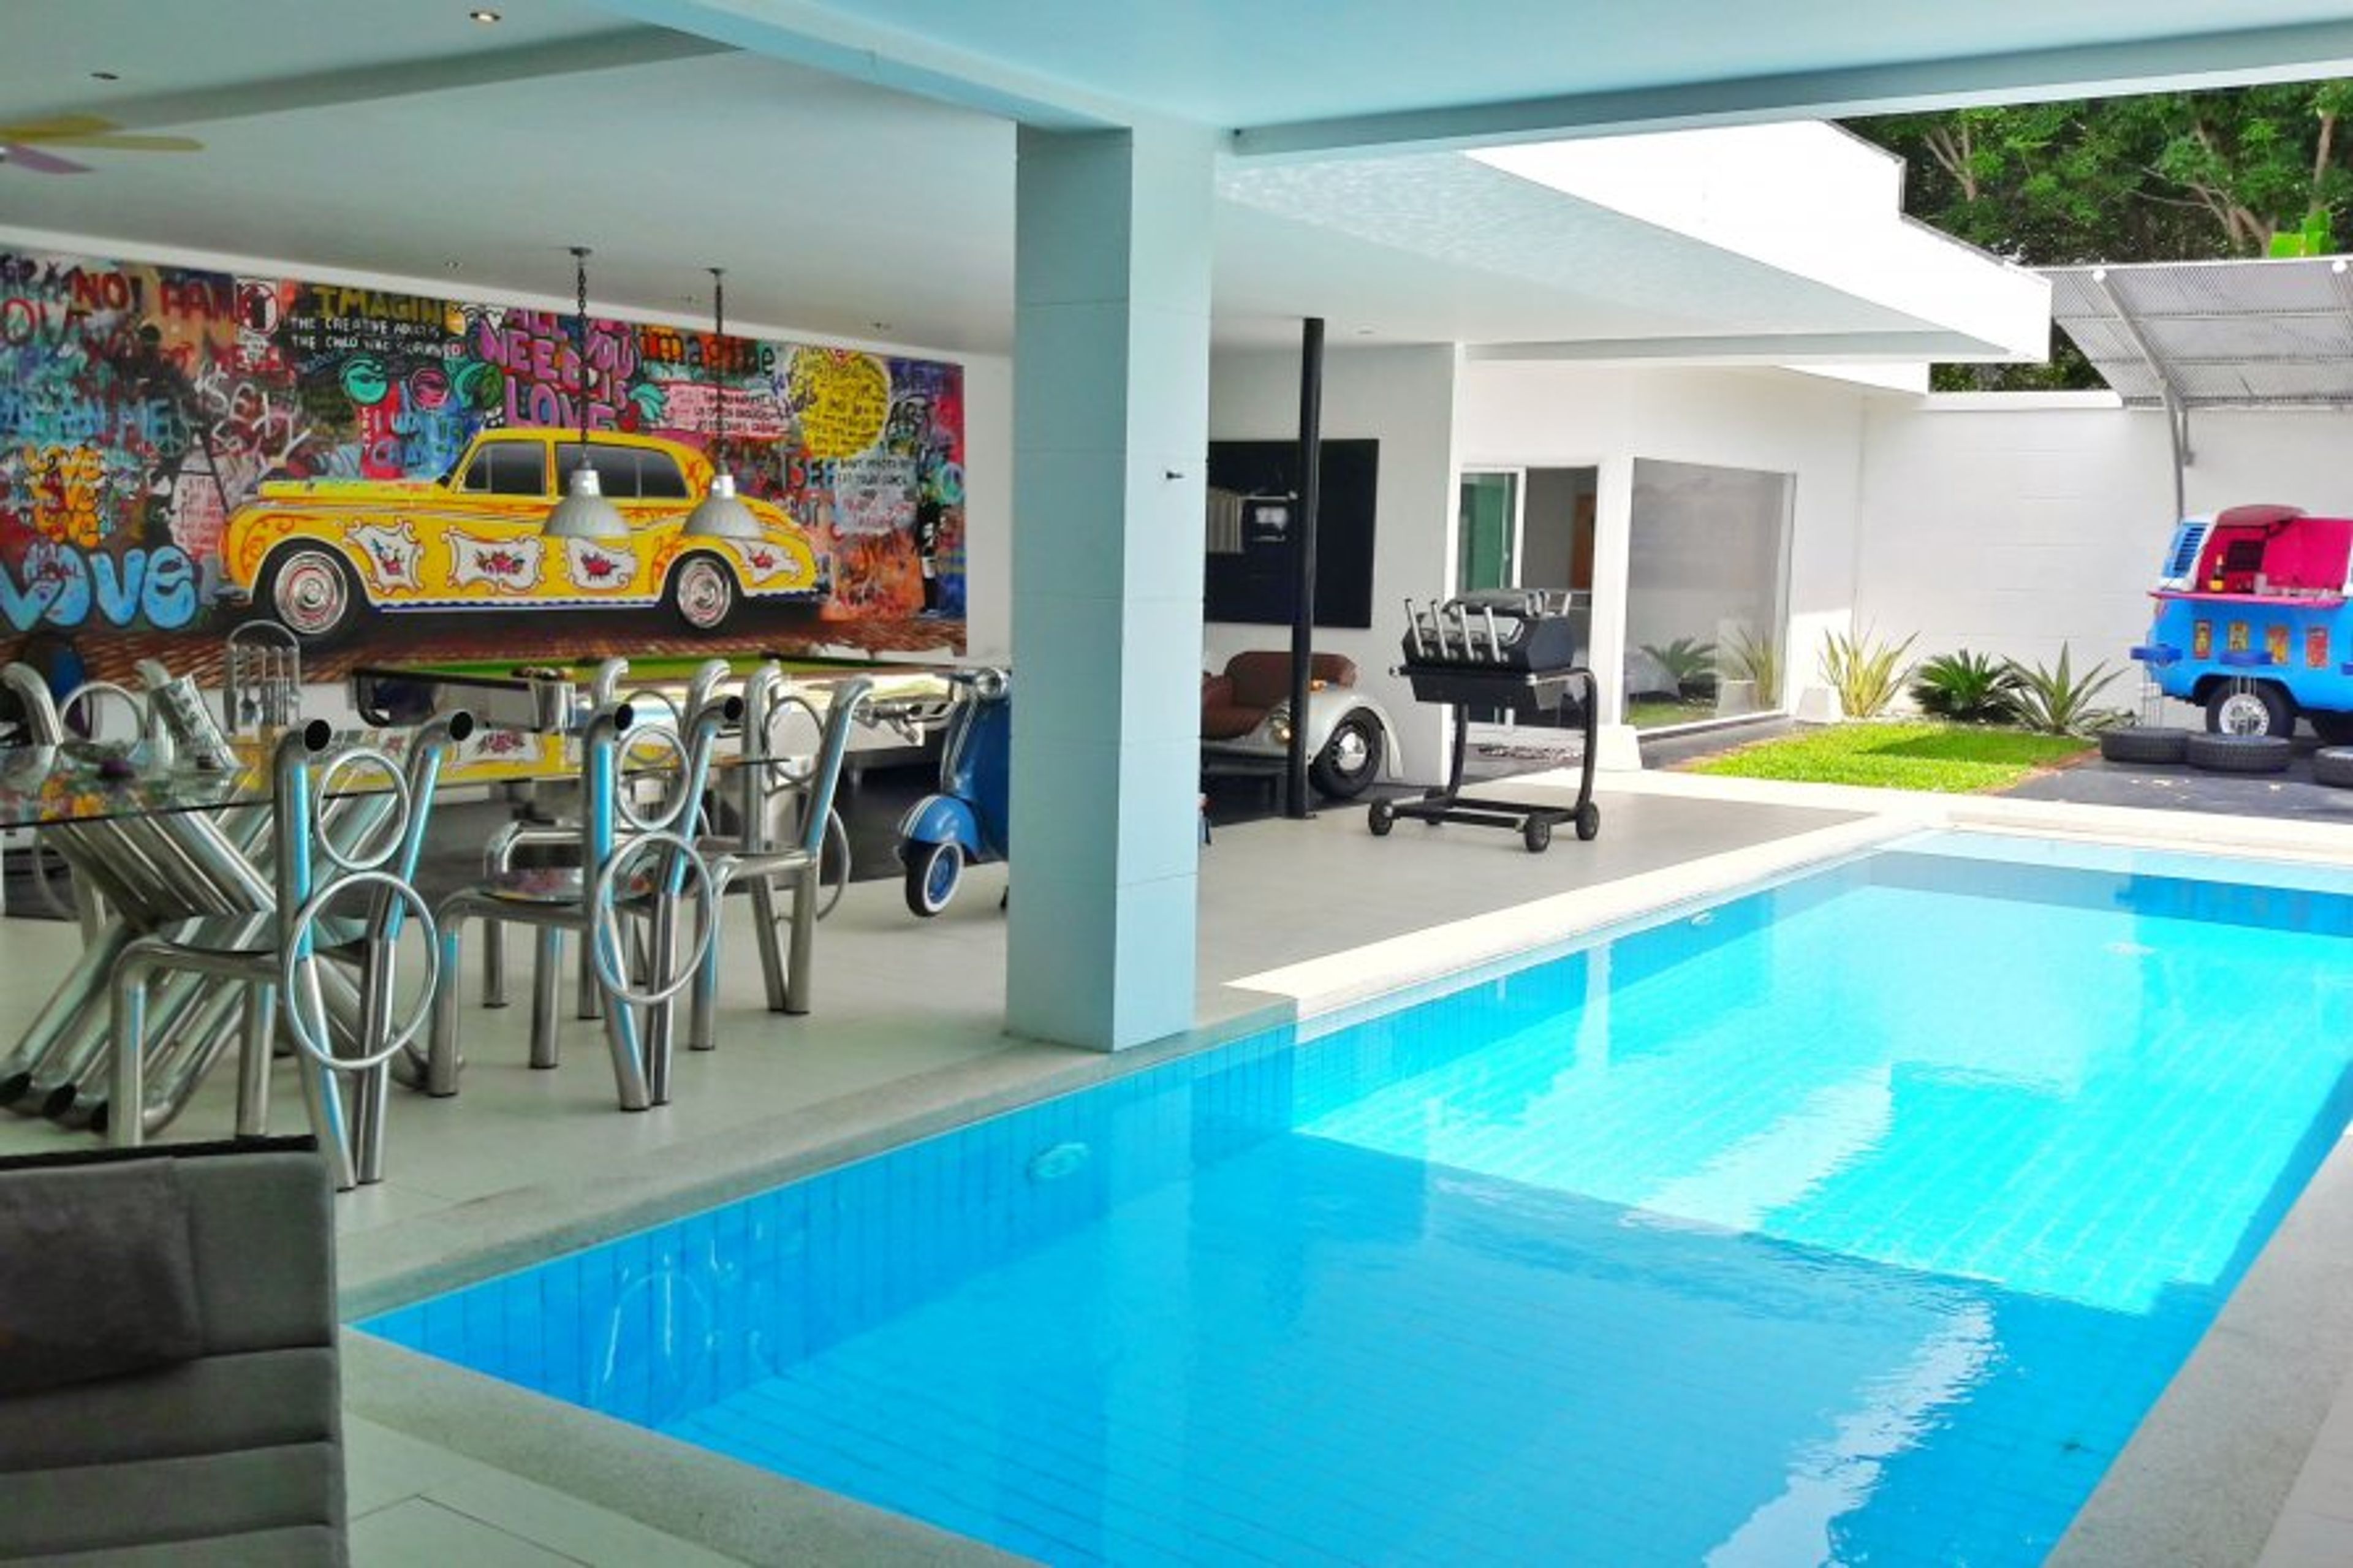 Pool 14 meters, V8 chairs and table, john lennon painting ,V8 bbq
